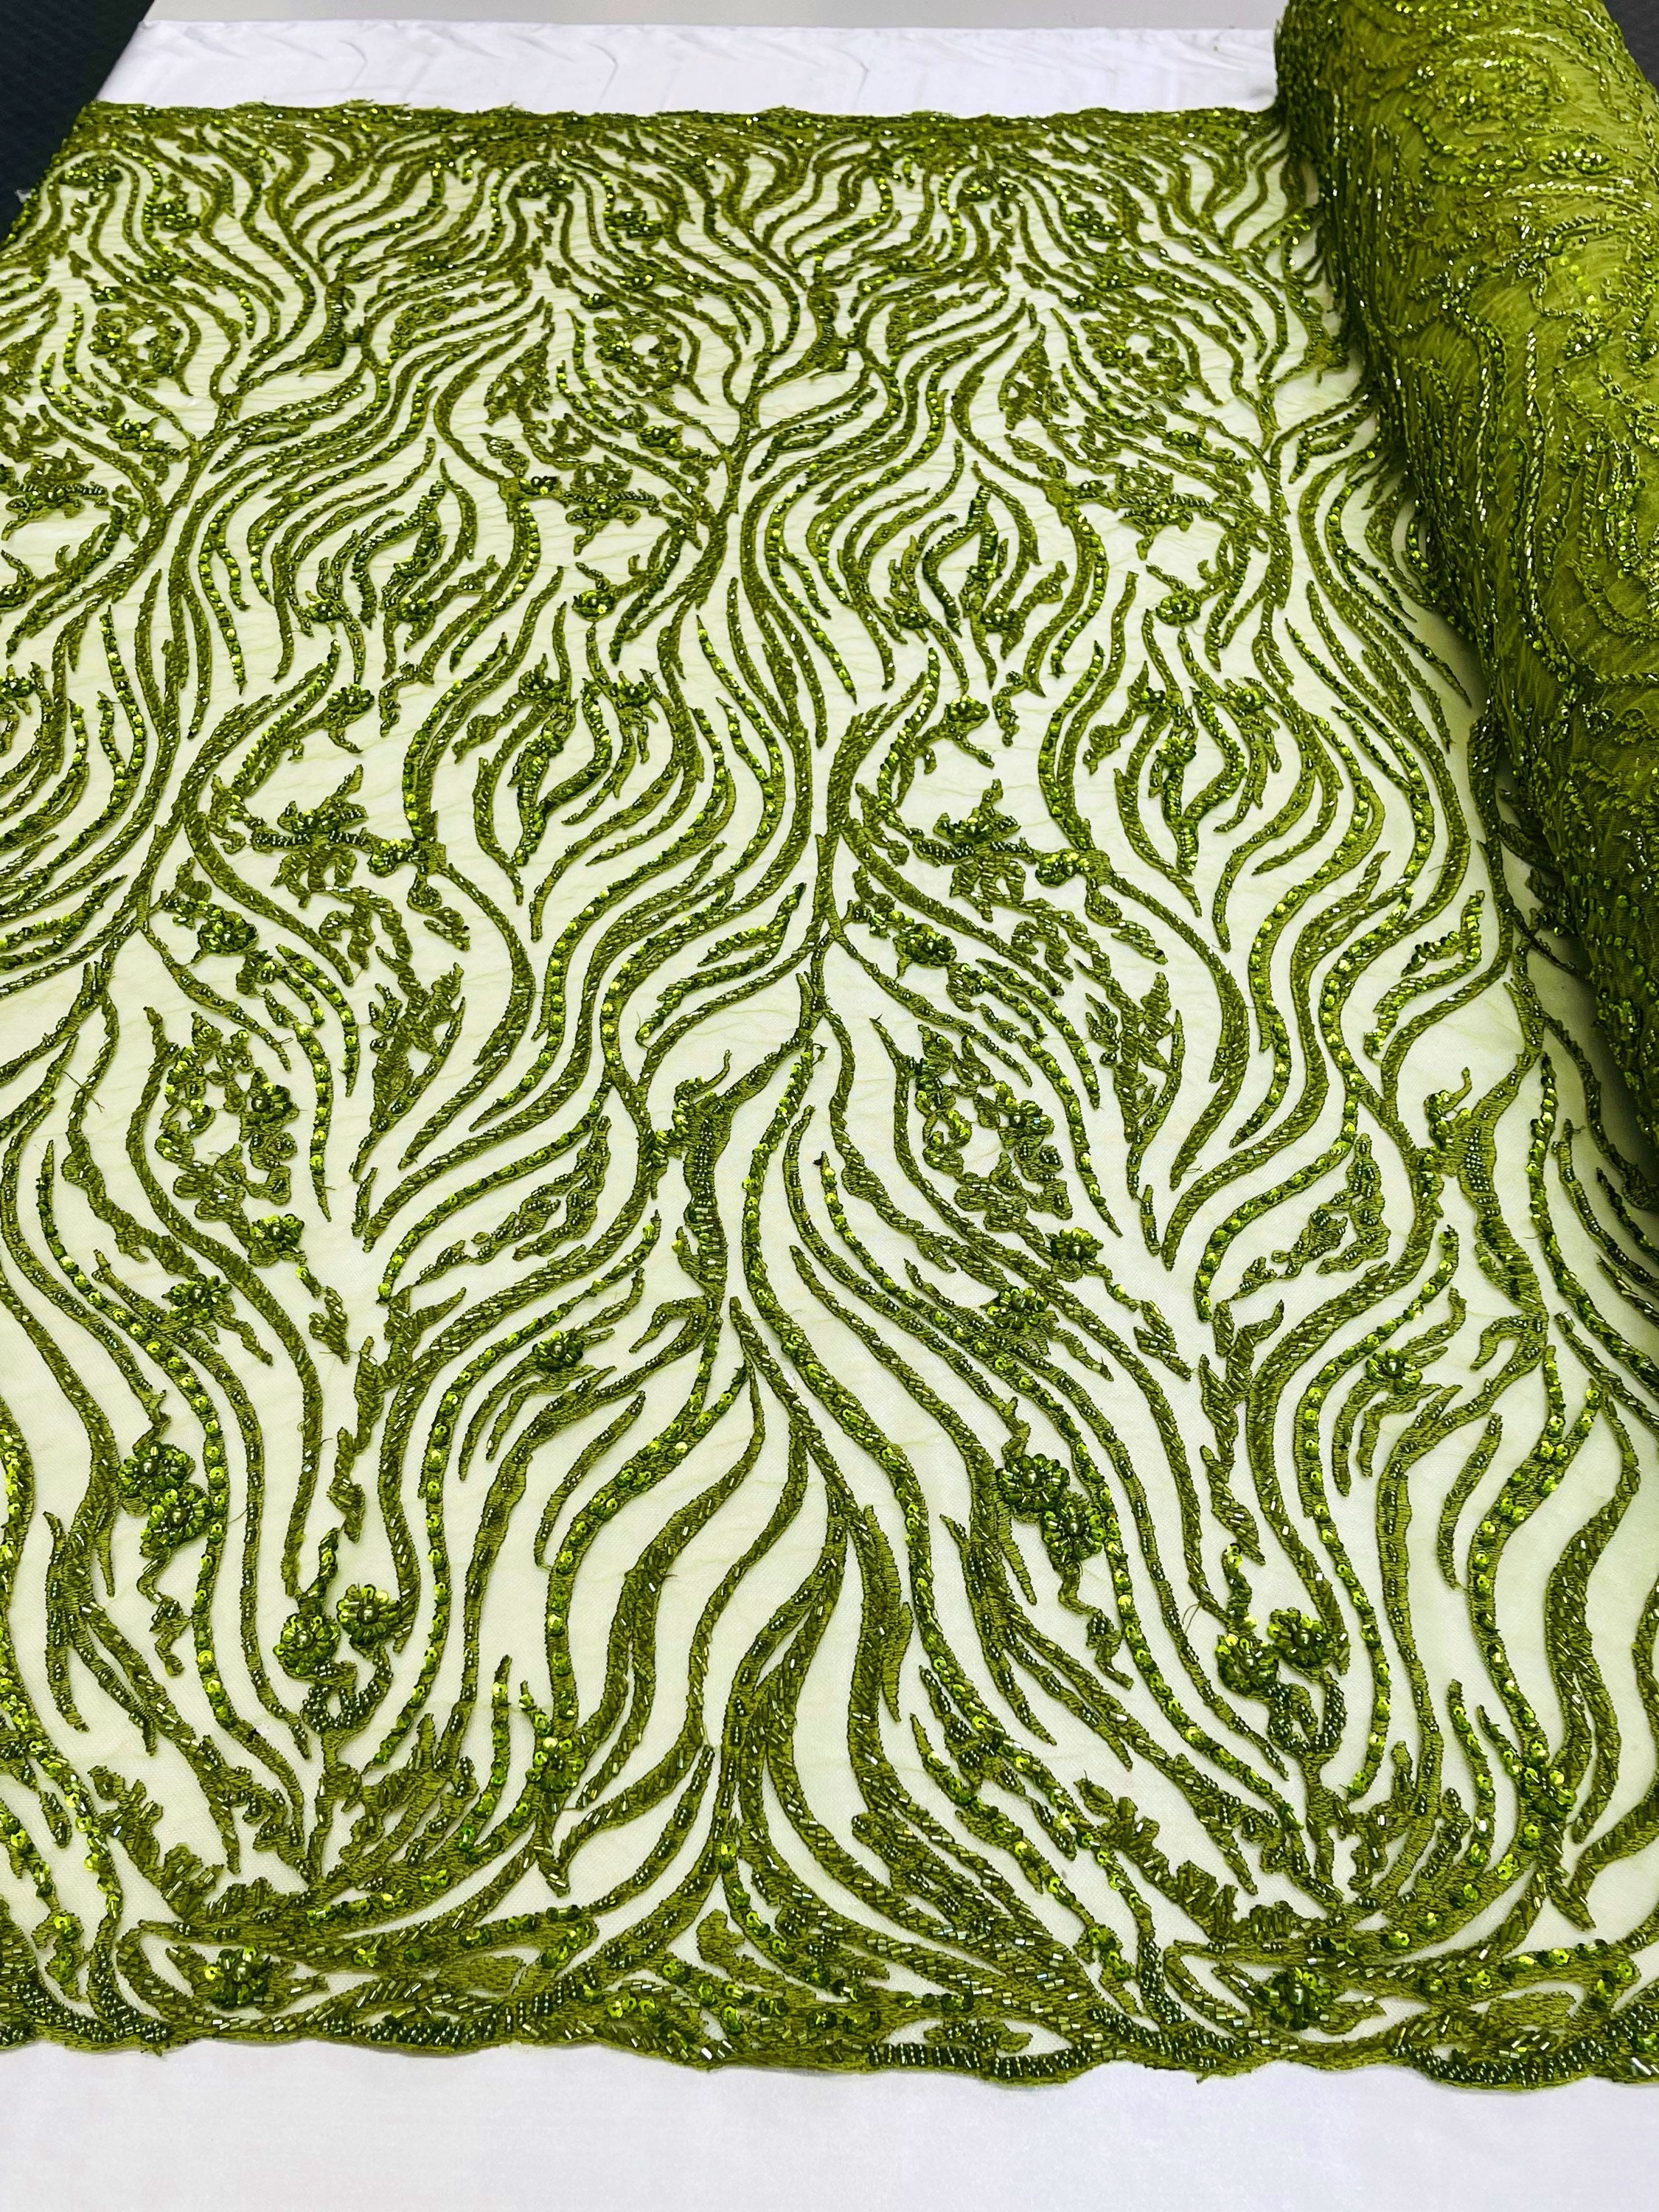 oneOone Cotton Cambric Olive Green Fabric Leaves Diy Clothing Quilting  Fabric Print Fabric By Yard 56 Inch Wide-LV 